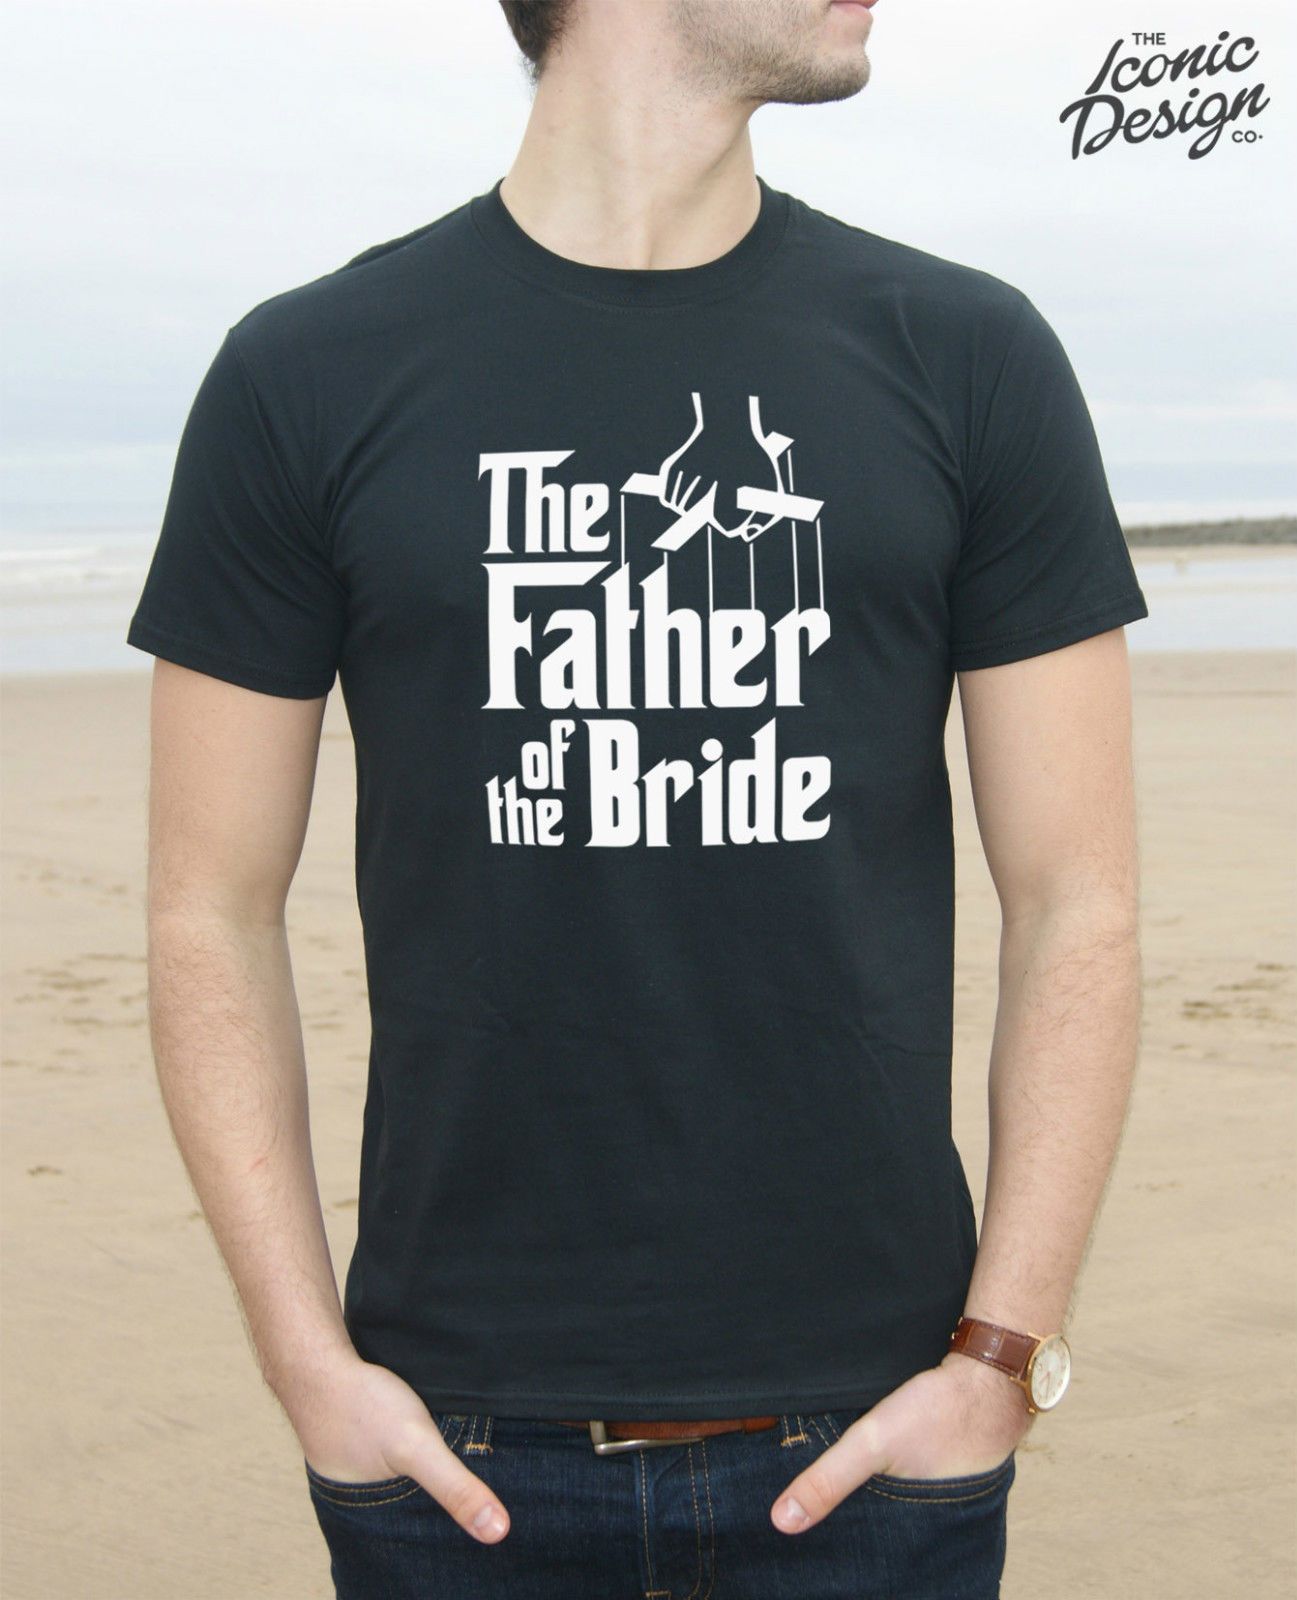 * The Father Of The Bride T-shirt Top Wedding Married Groom Stag Do Funny  Gift Funny Tops Tee New Unisex Funny Freeshipping